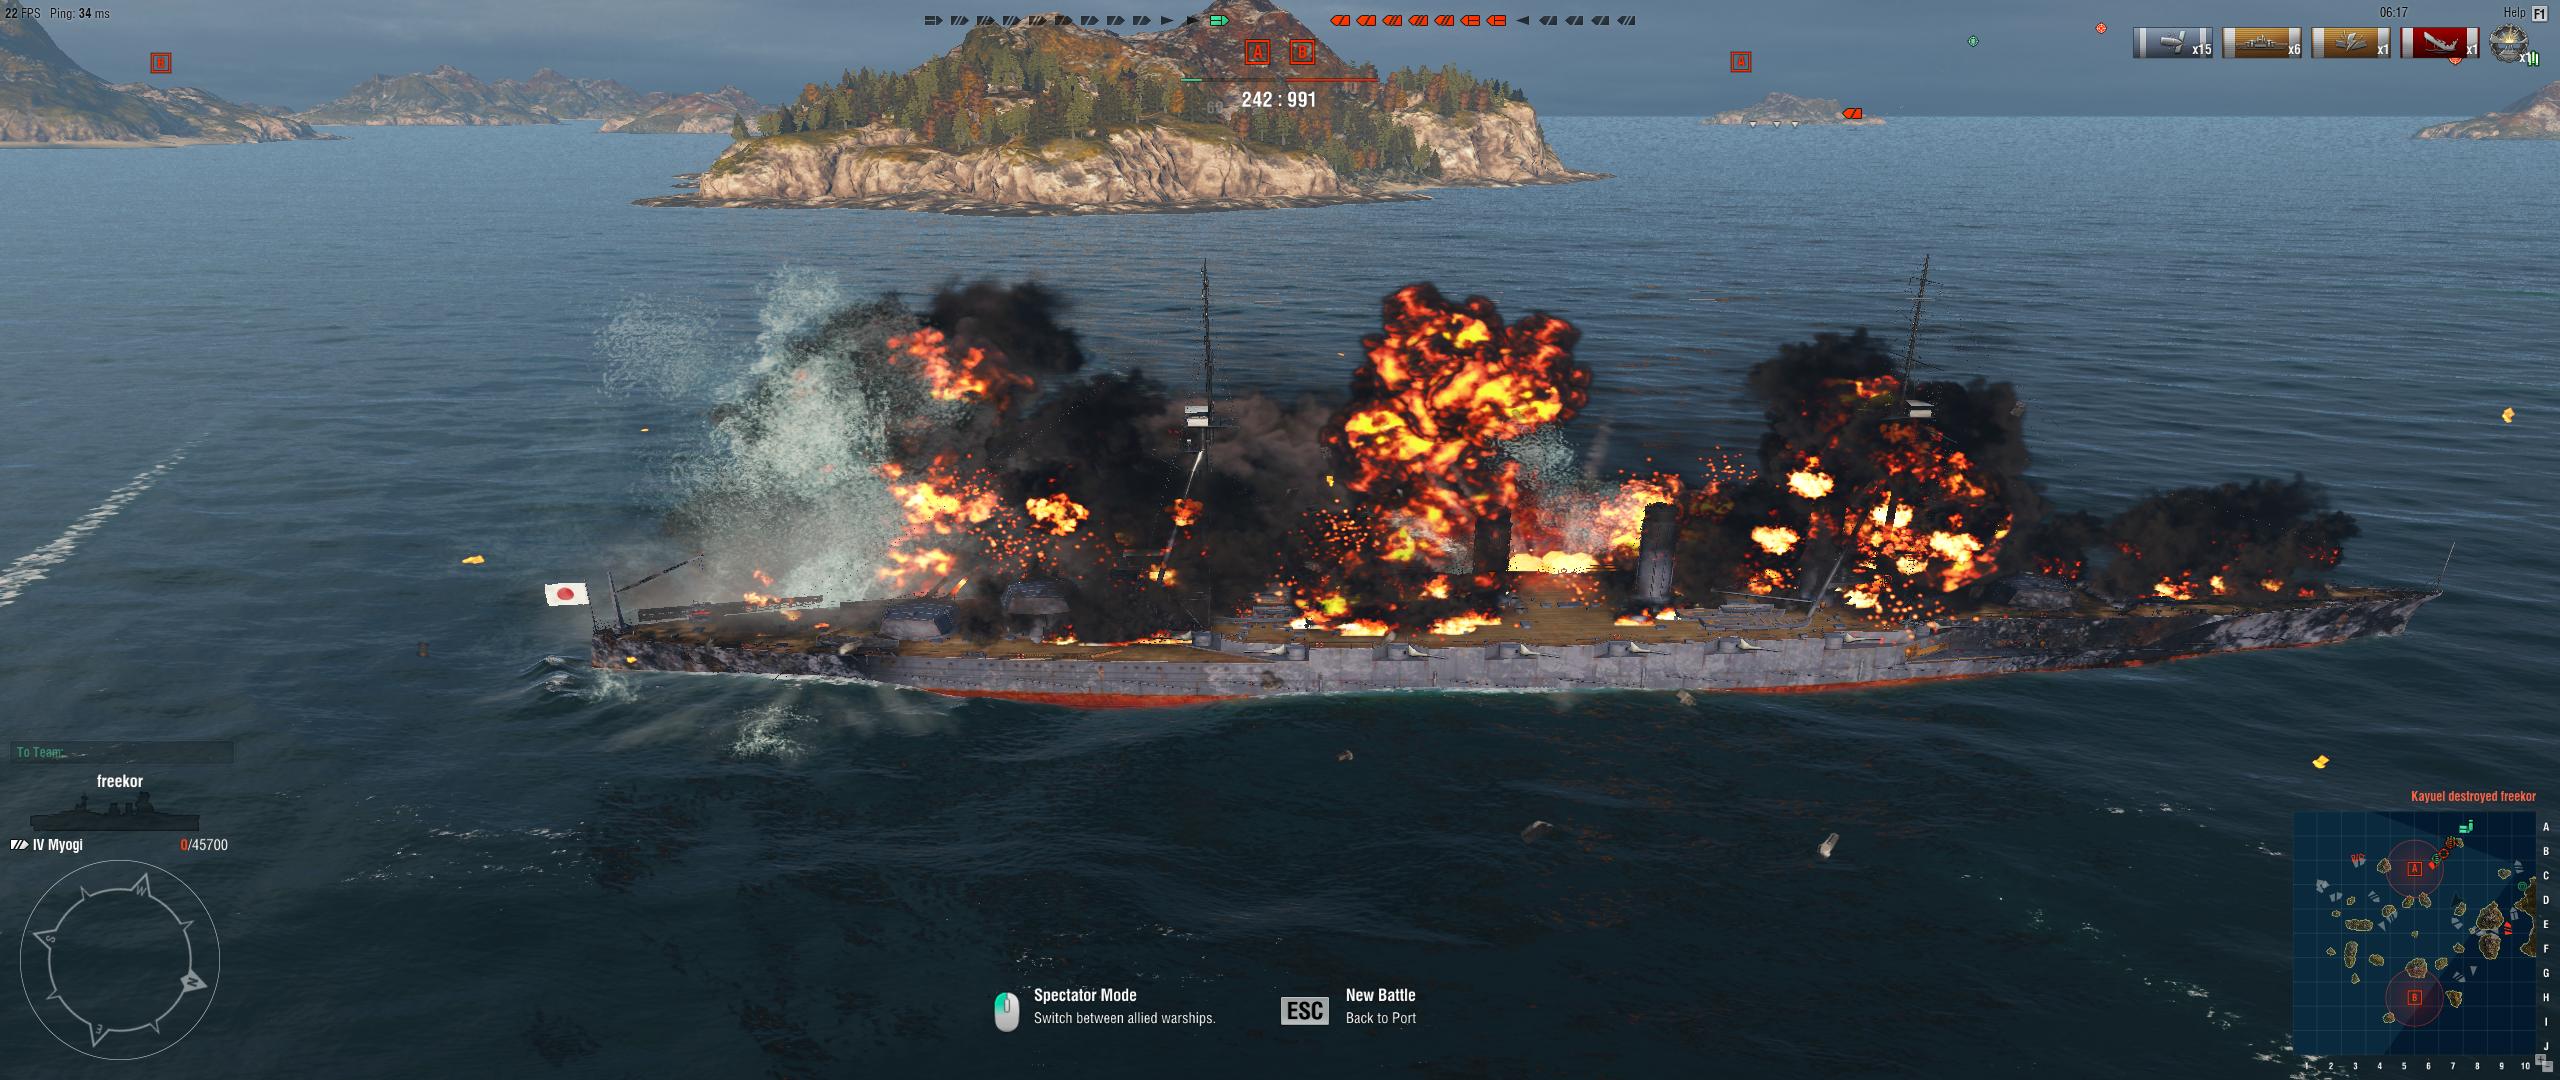 Battleships frequently find themselves burning when meeting torpedoes. 